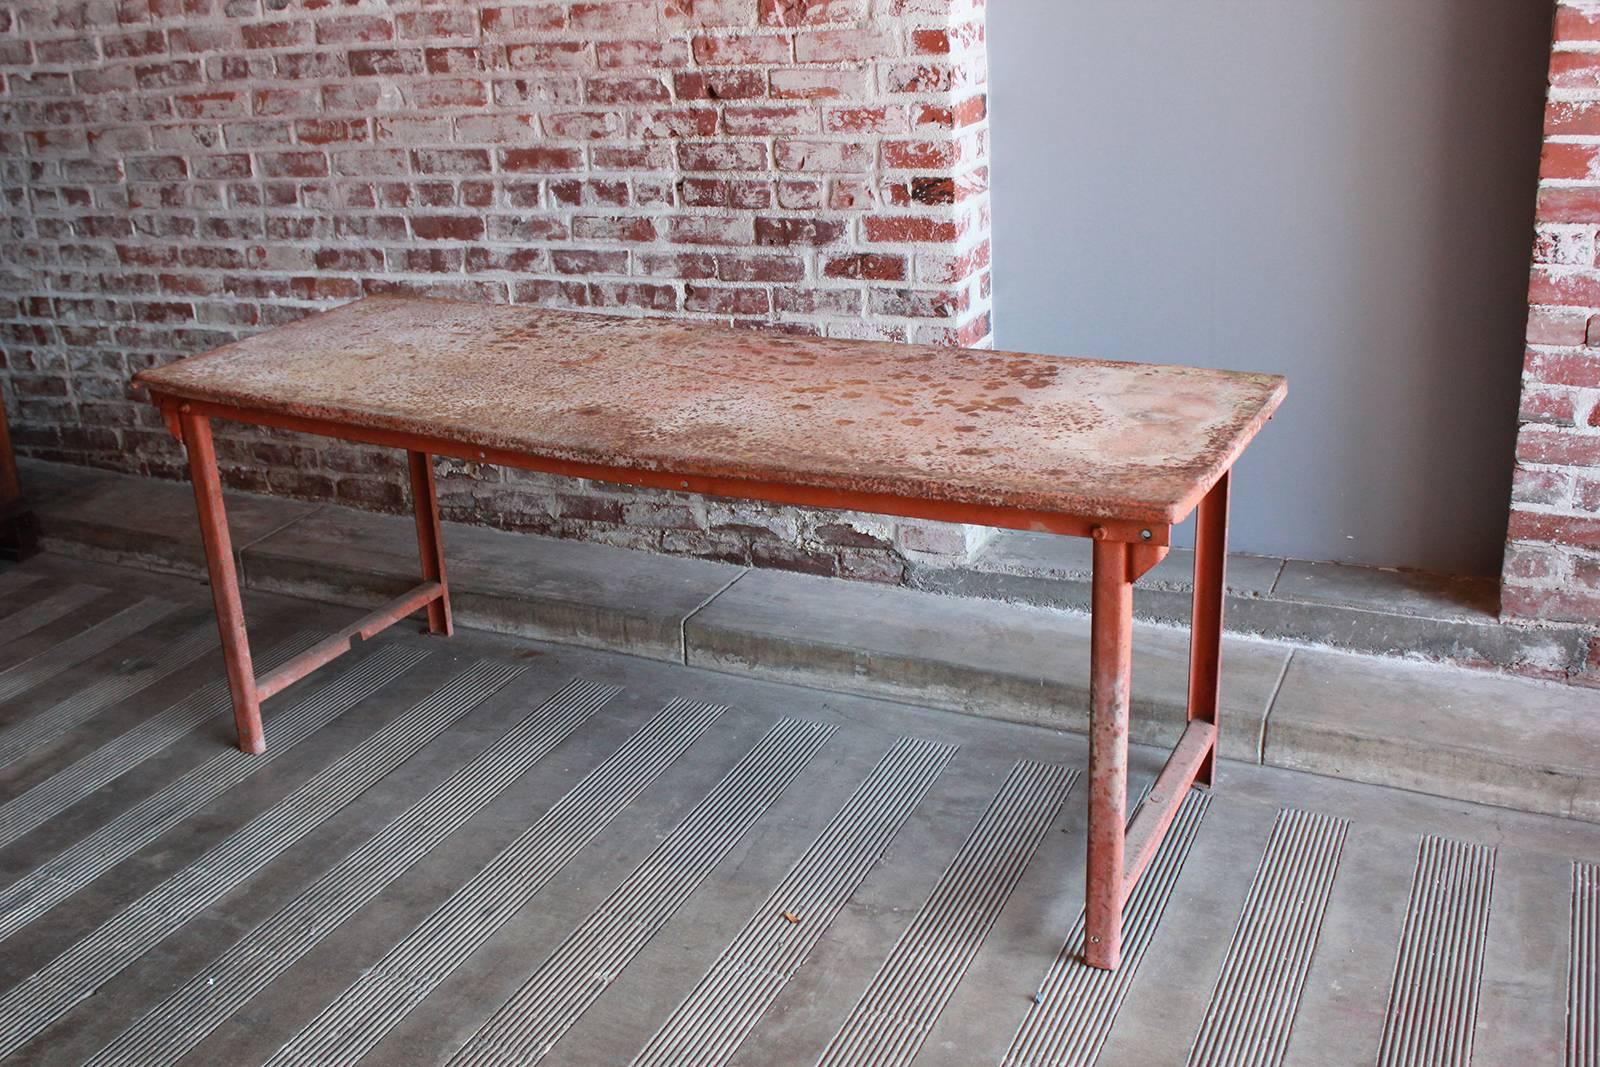 Red work table with rusted patina.